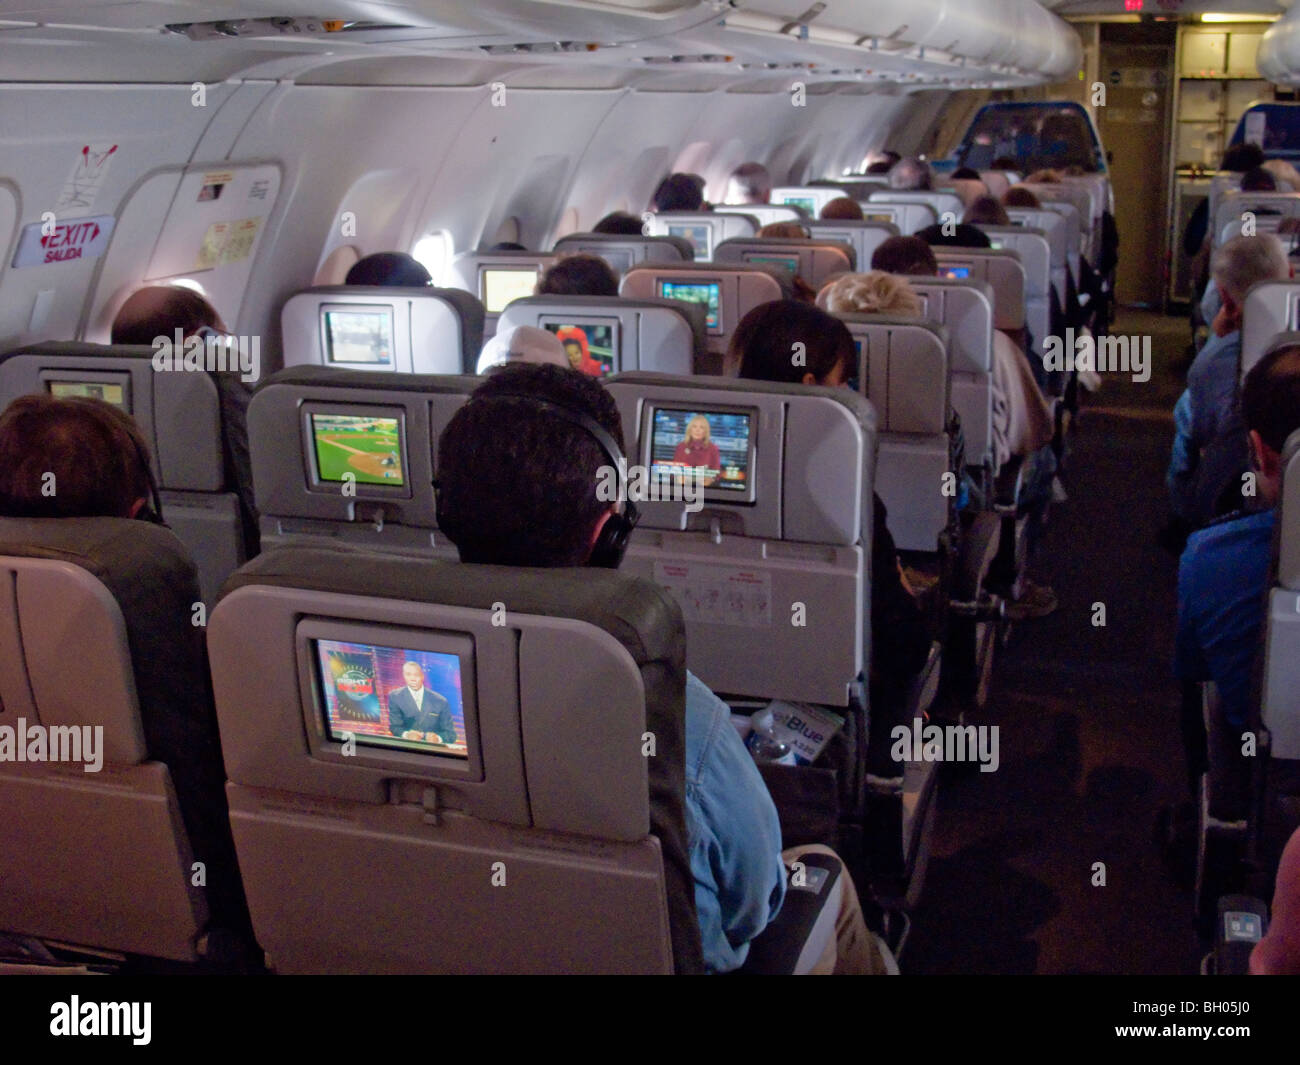 Airline cabin passengers enjoy in-flight television entertainment on individual screens at their seats. Stock Photo